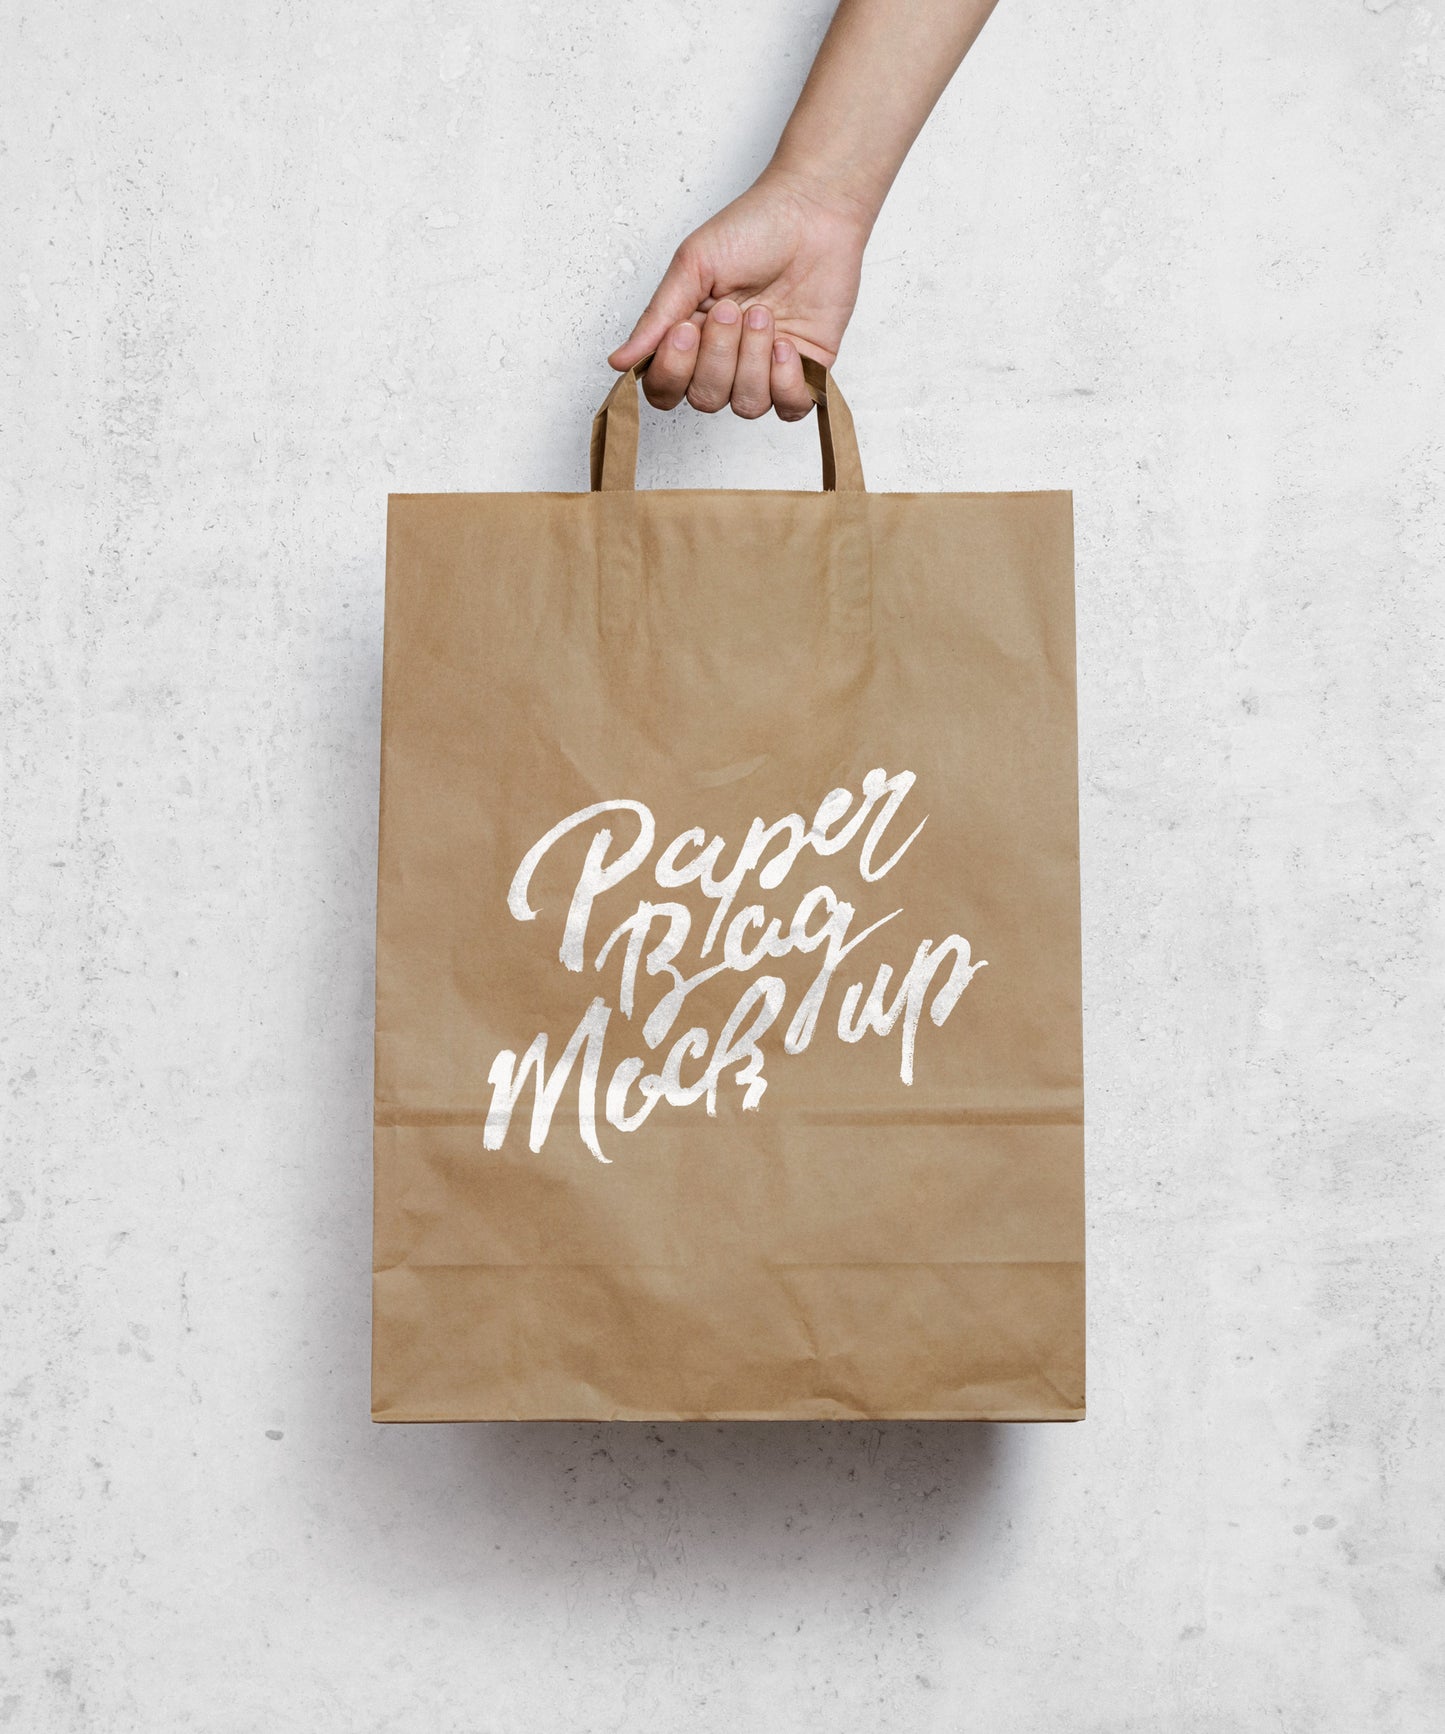 Free Hand Holding a Brown Paper Bag MockUp